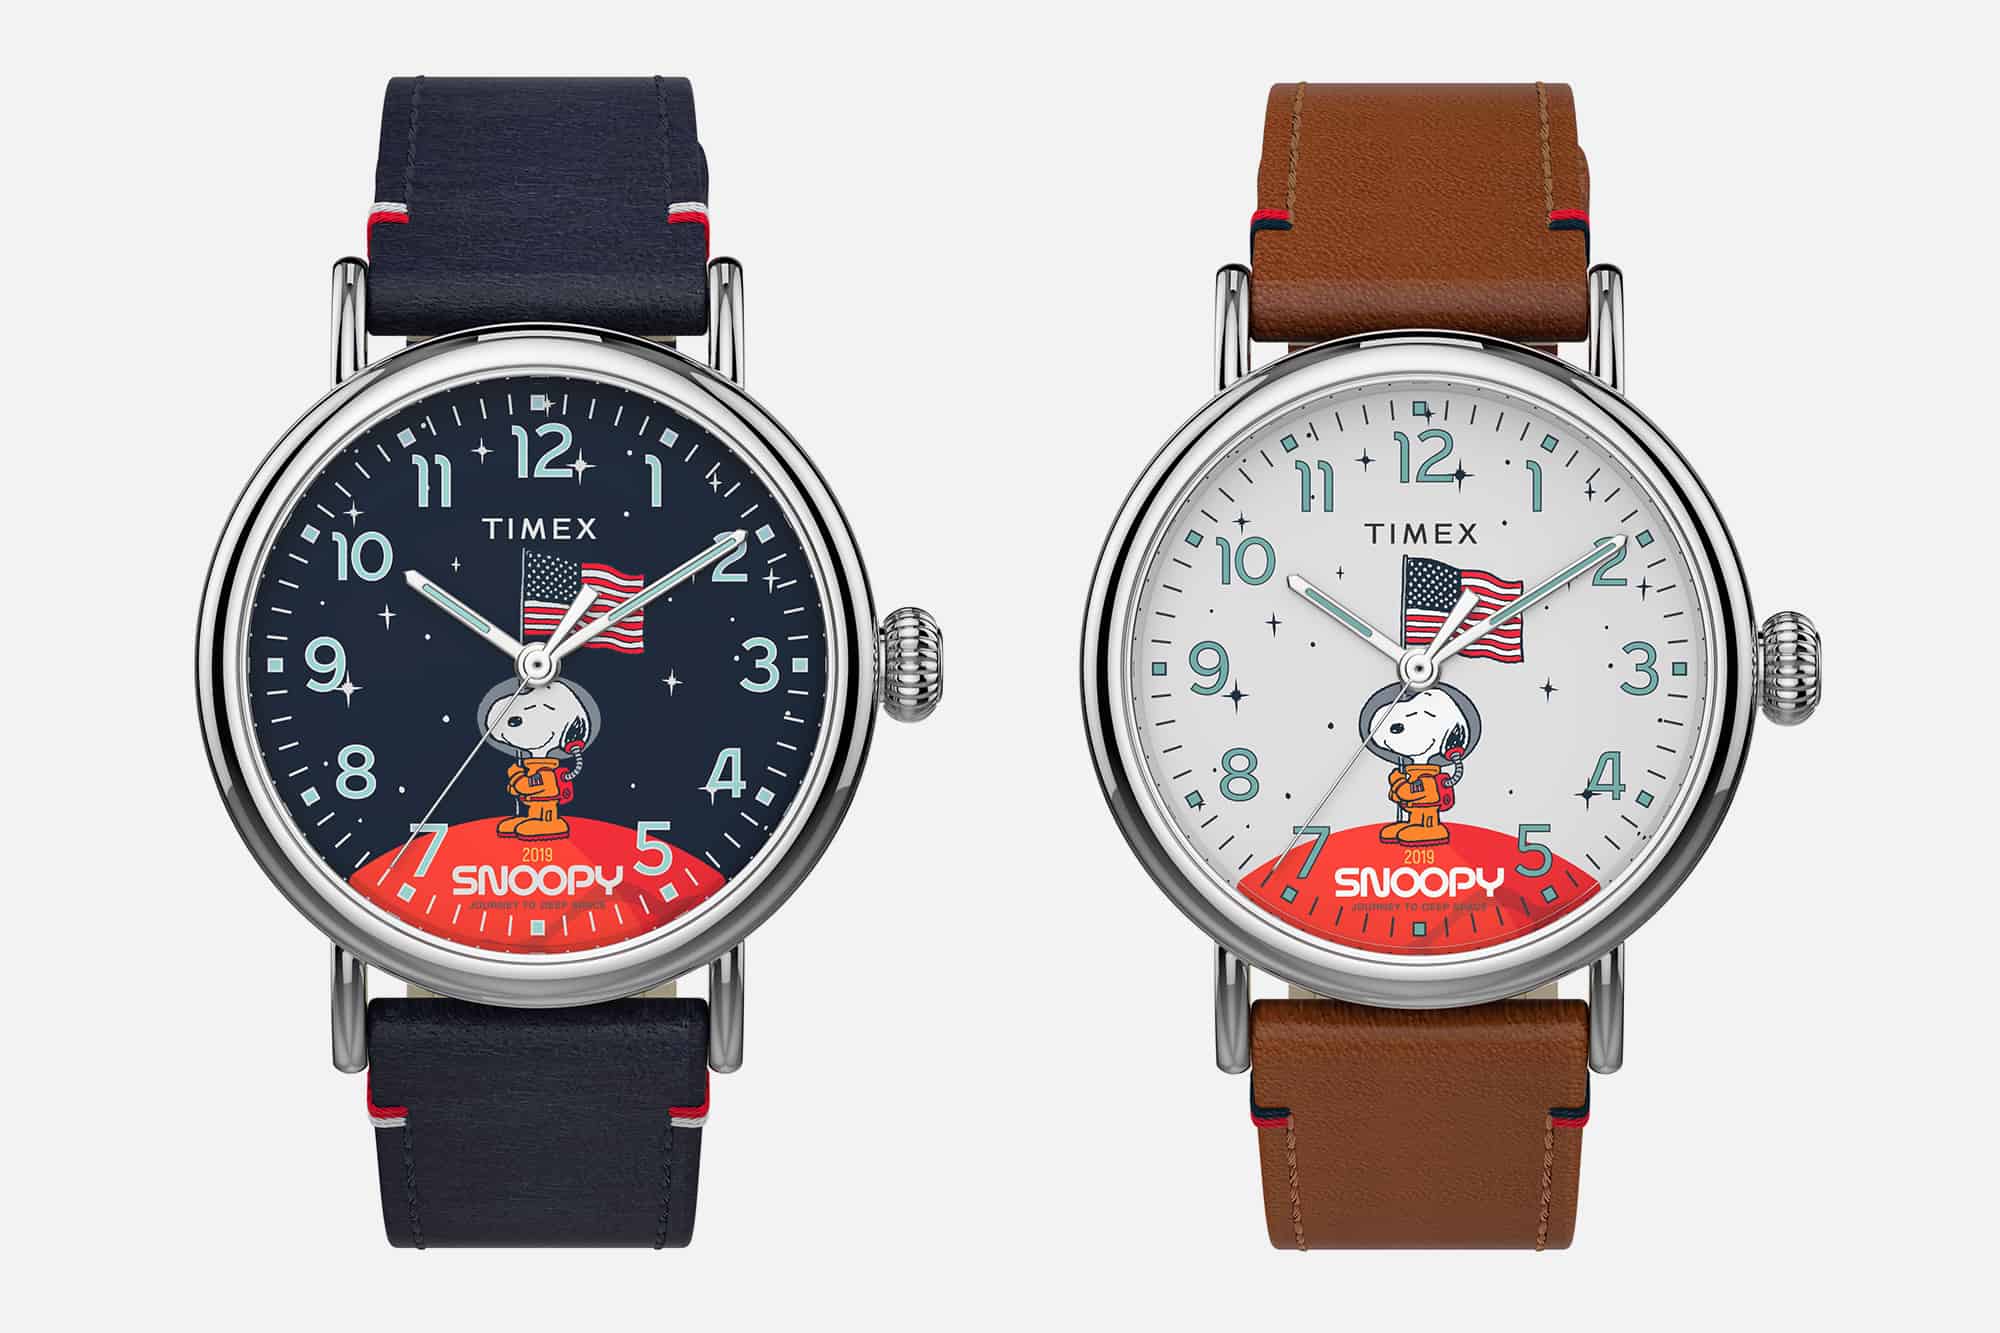 Timex Celebrates the 50th Anniversary of the Moon Landing with the Snoopy in Space Collection